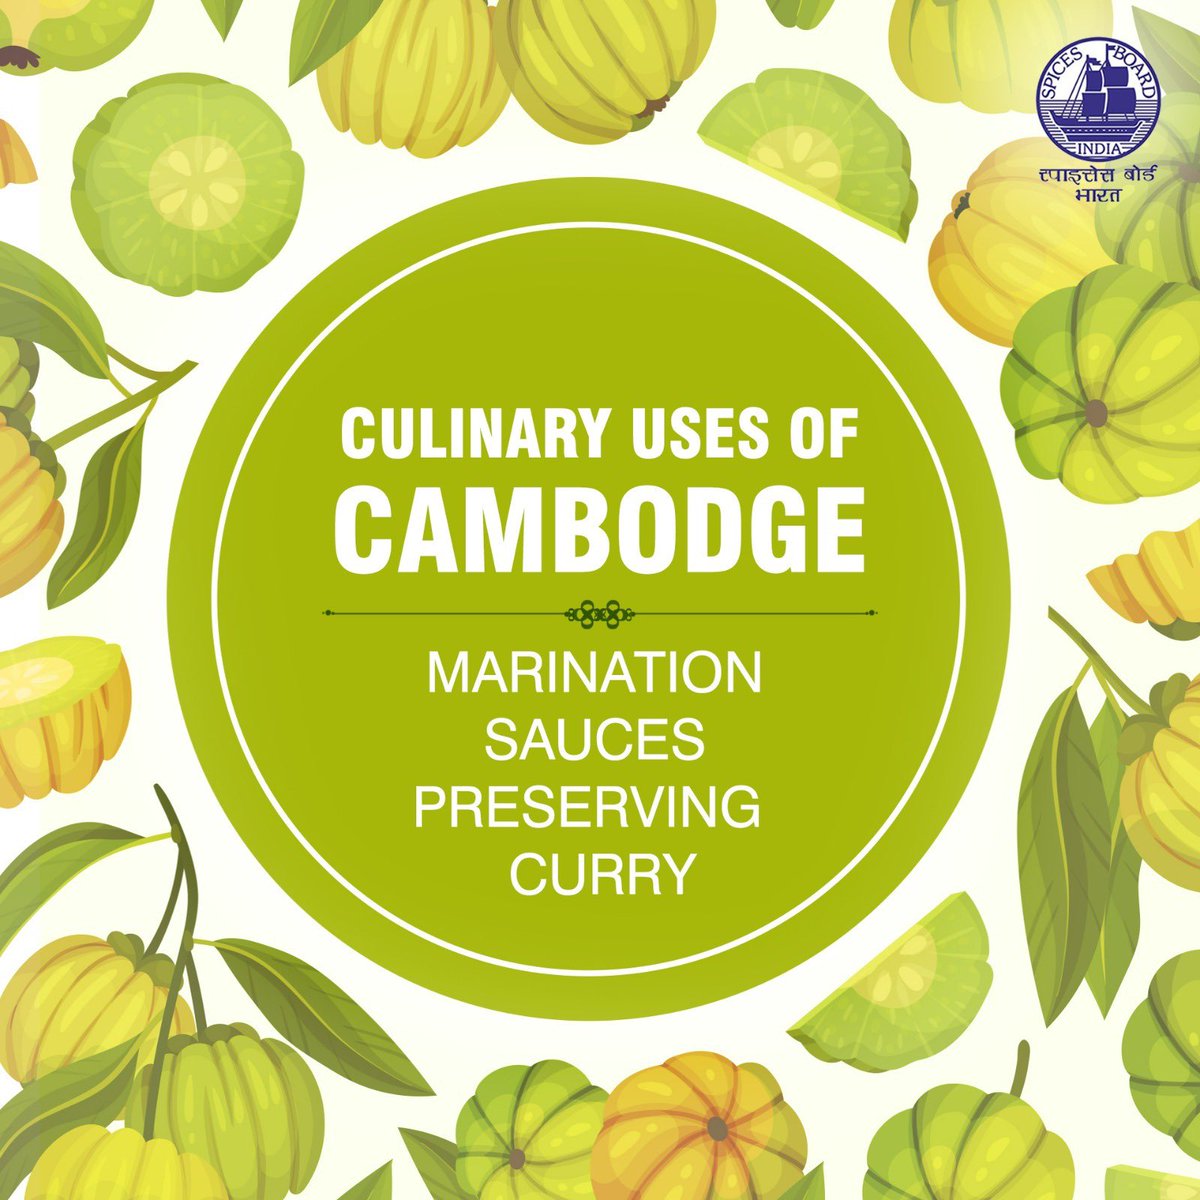 Cambodge isn't just a spice, it's a culinary powerhouse! this versatile ingredient adds a tangy twist to your favorite dishes! @doc_goi #spicesboard #Cambodge #incrediblespicesofindia